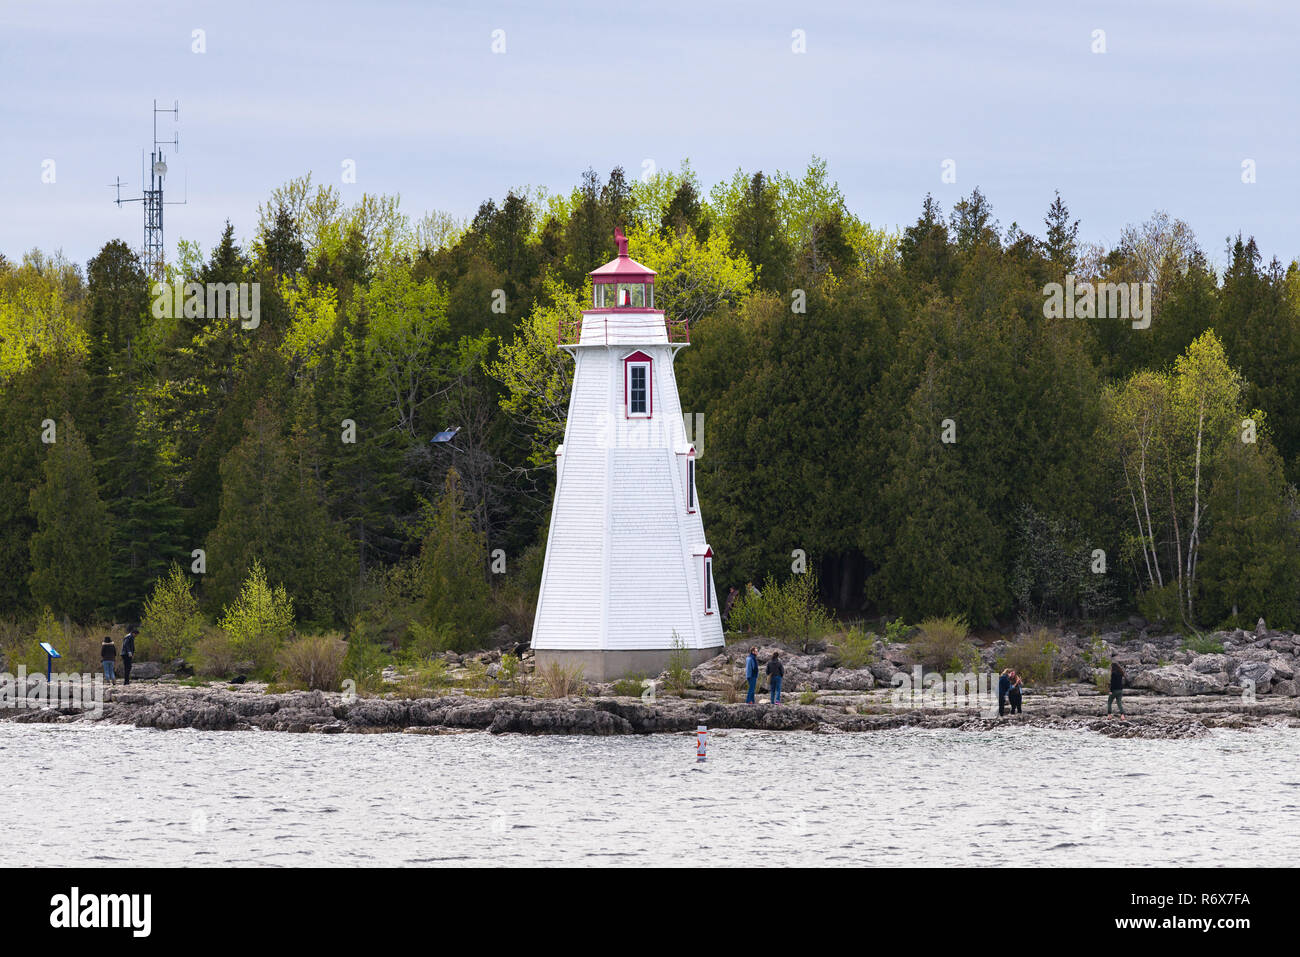 People standing on the rocky coast near Big Tub Lighthouse at the entrance of Big Tub Harbour, Tobermory, Ontario, Canada Stock Photo